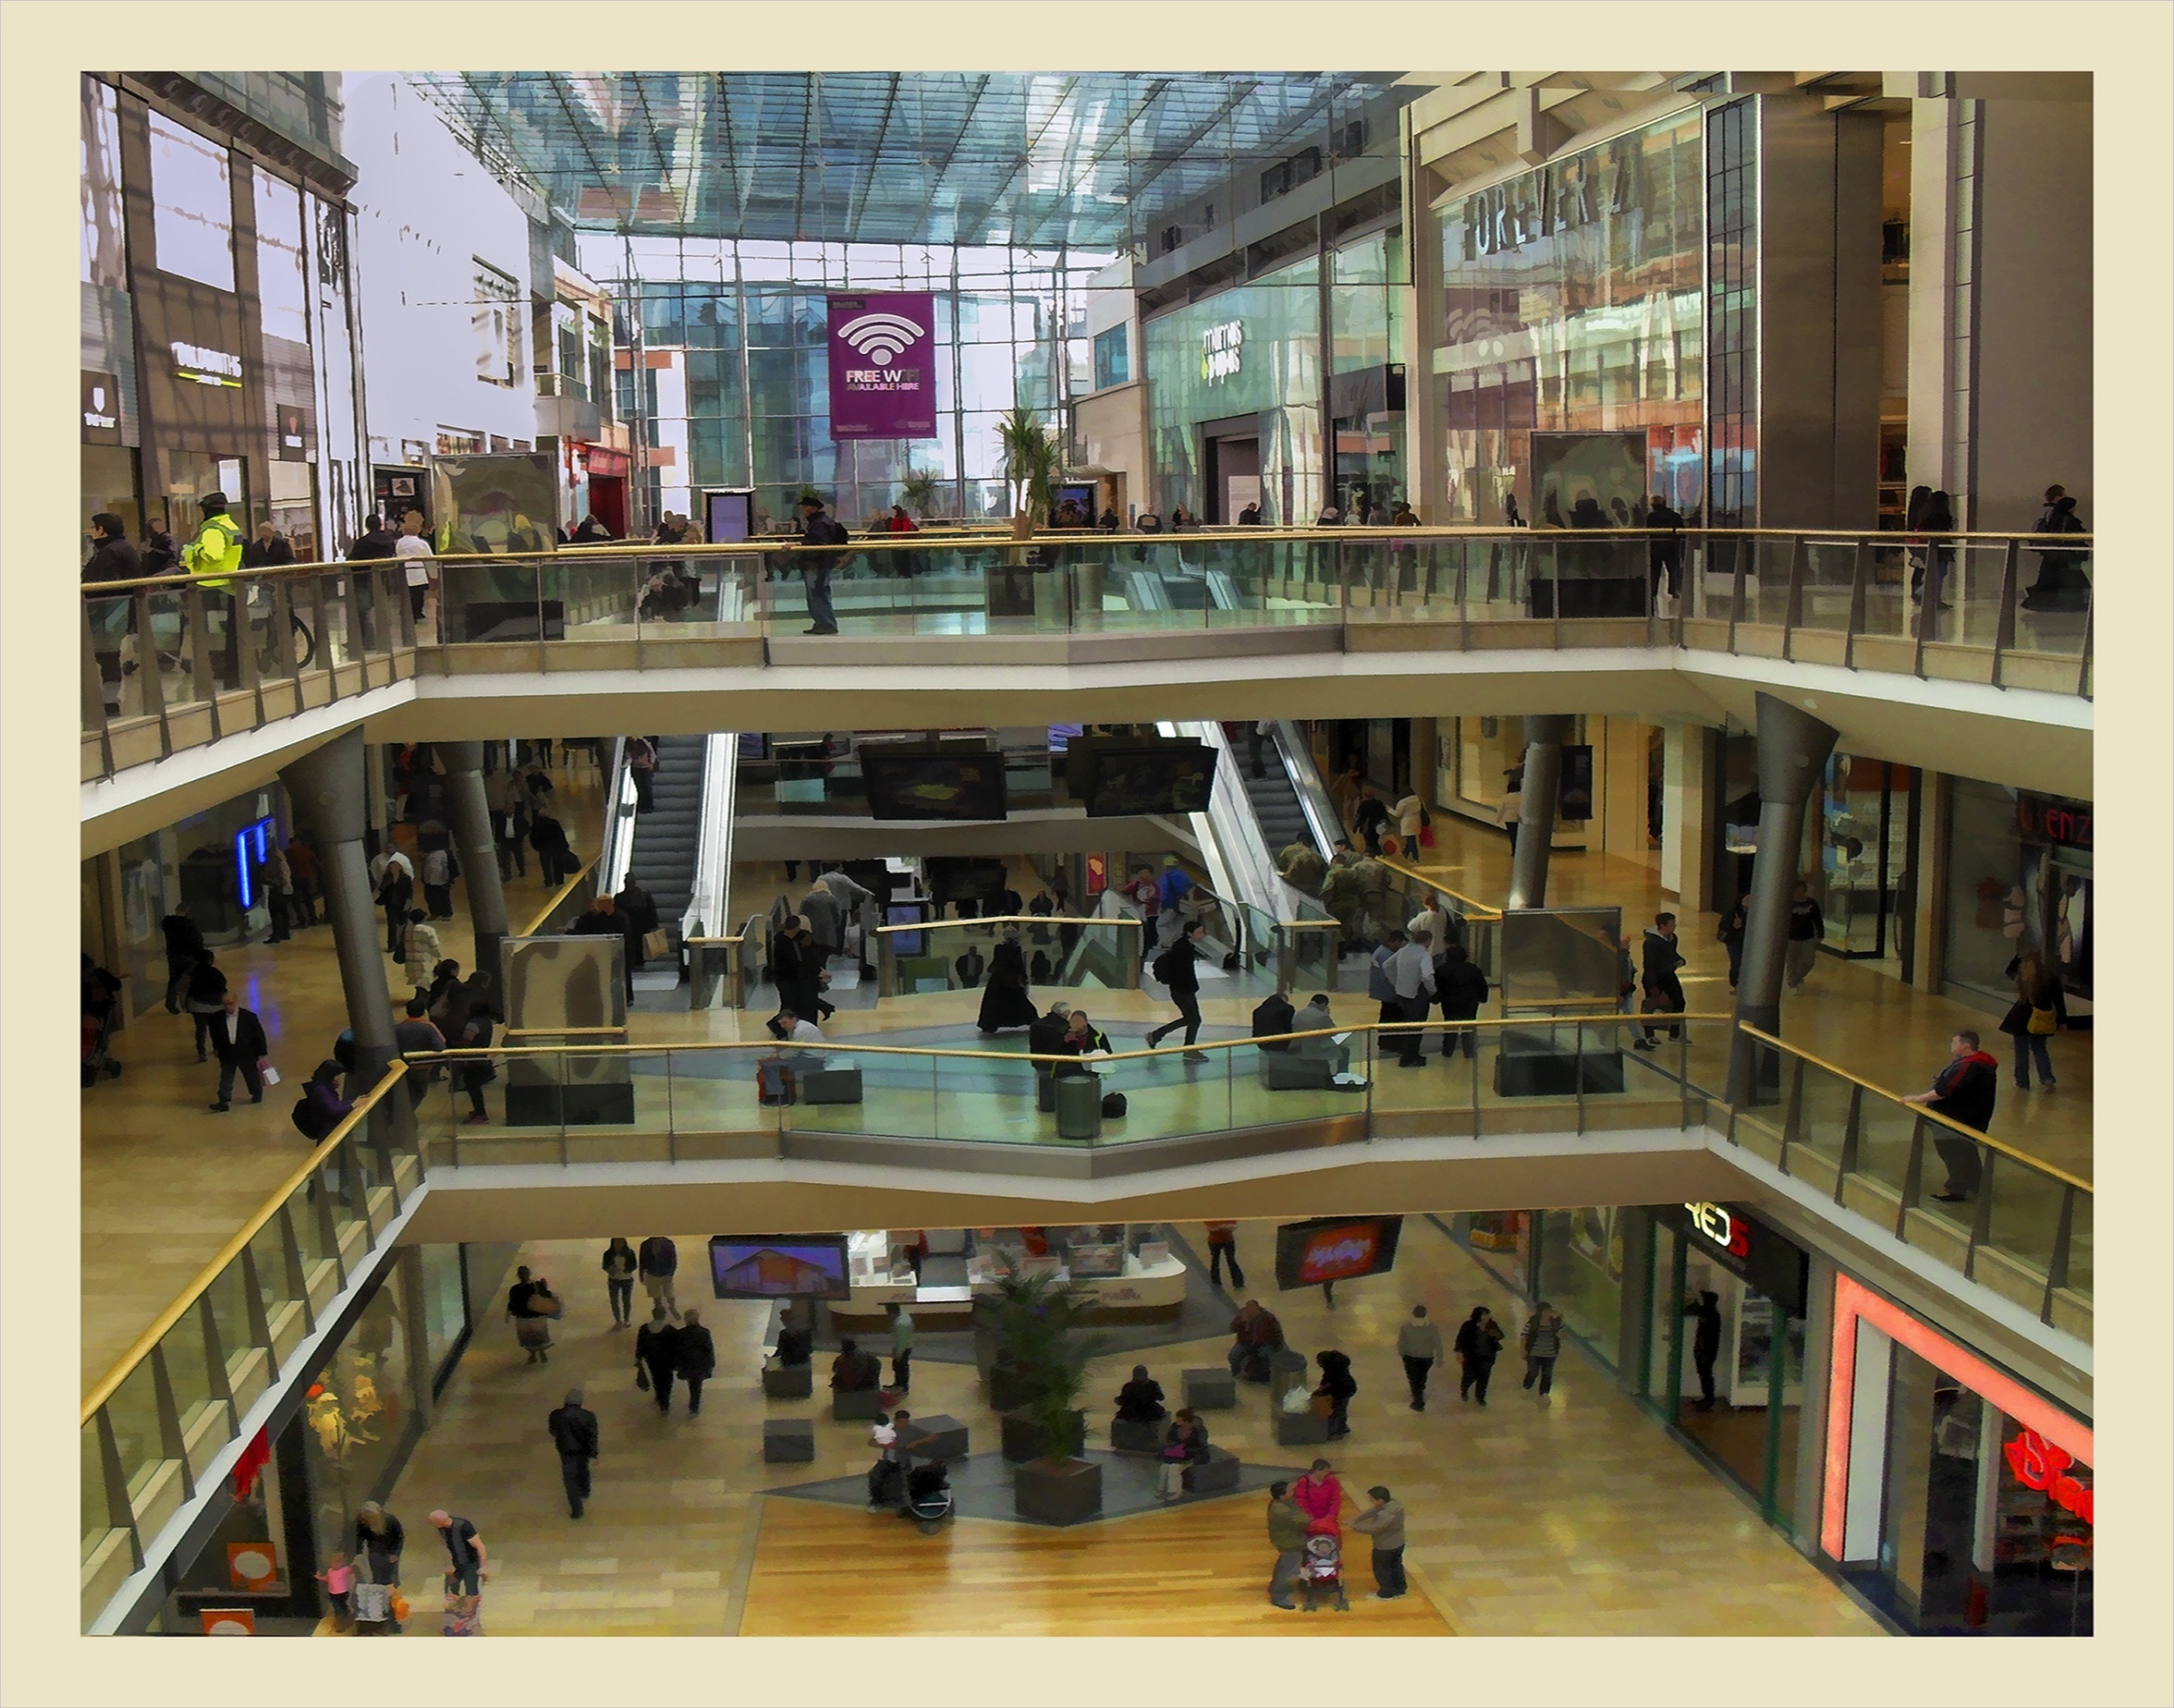 Bullring, Birmingham, Shopping Center, large group of people, architecture